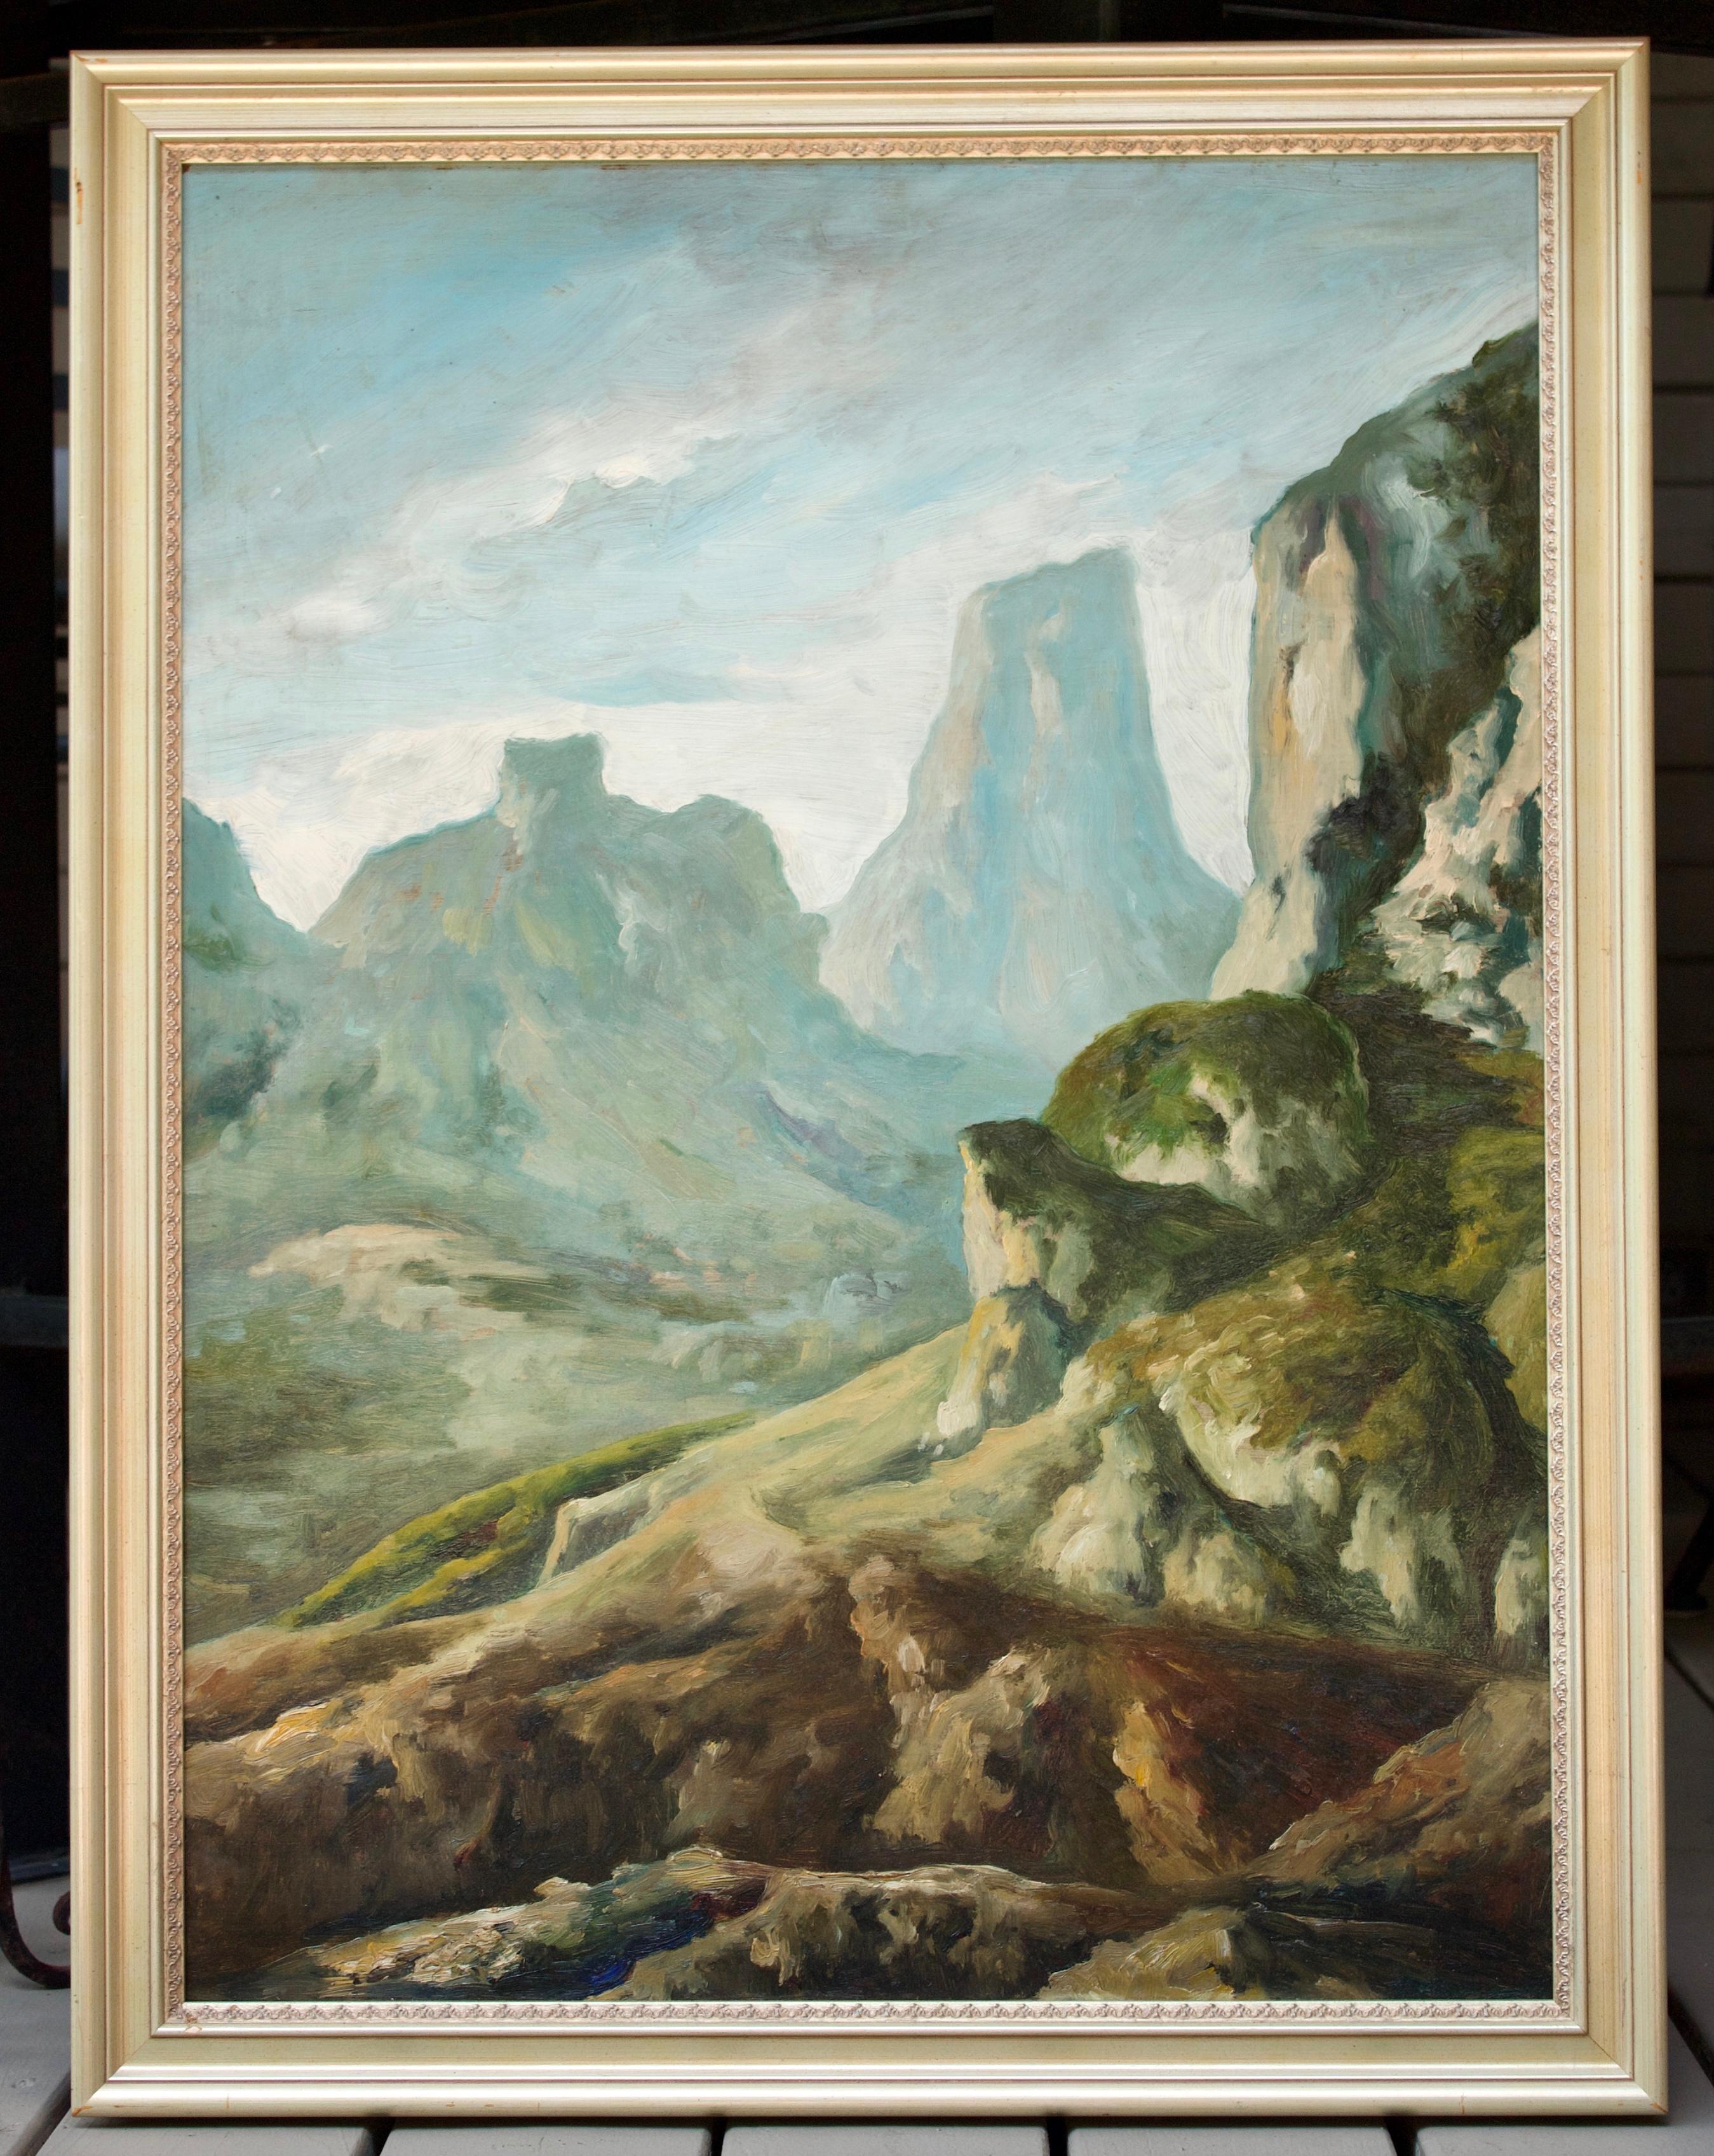 Untitled, Desert Mountains in Spring - Painting by Jose Vives-Atsara